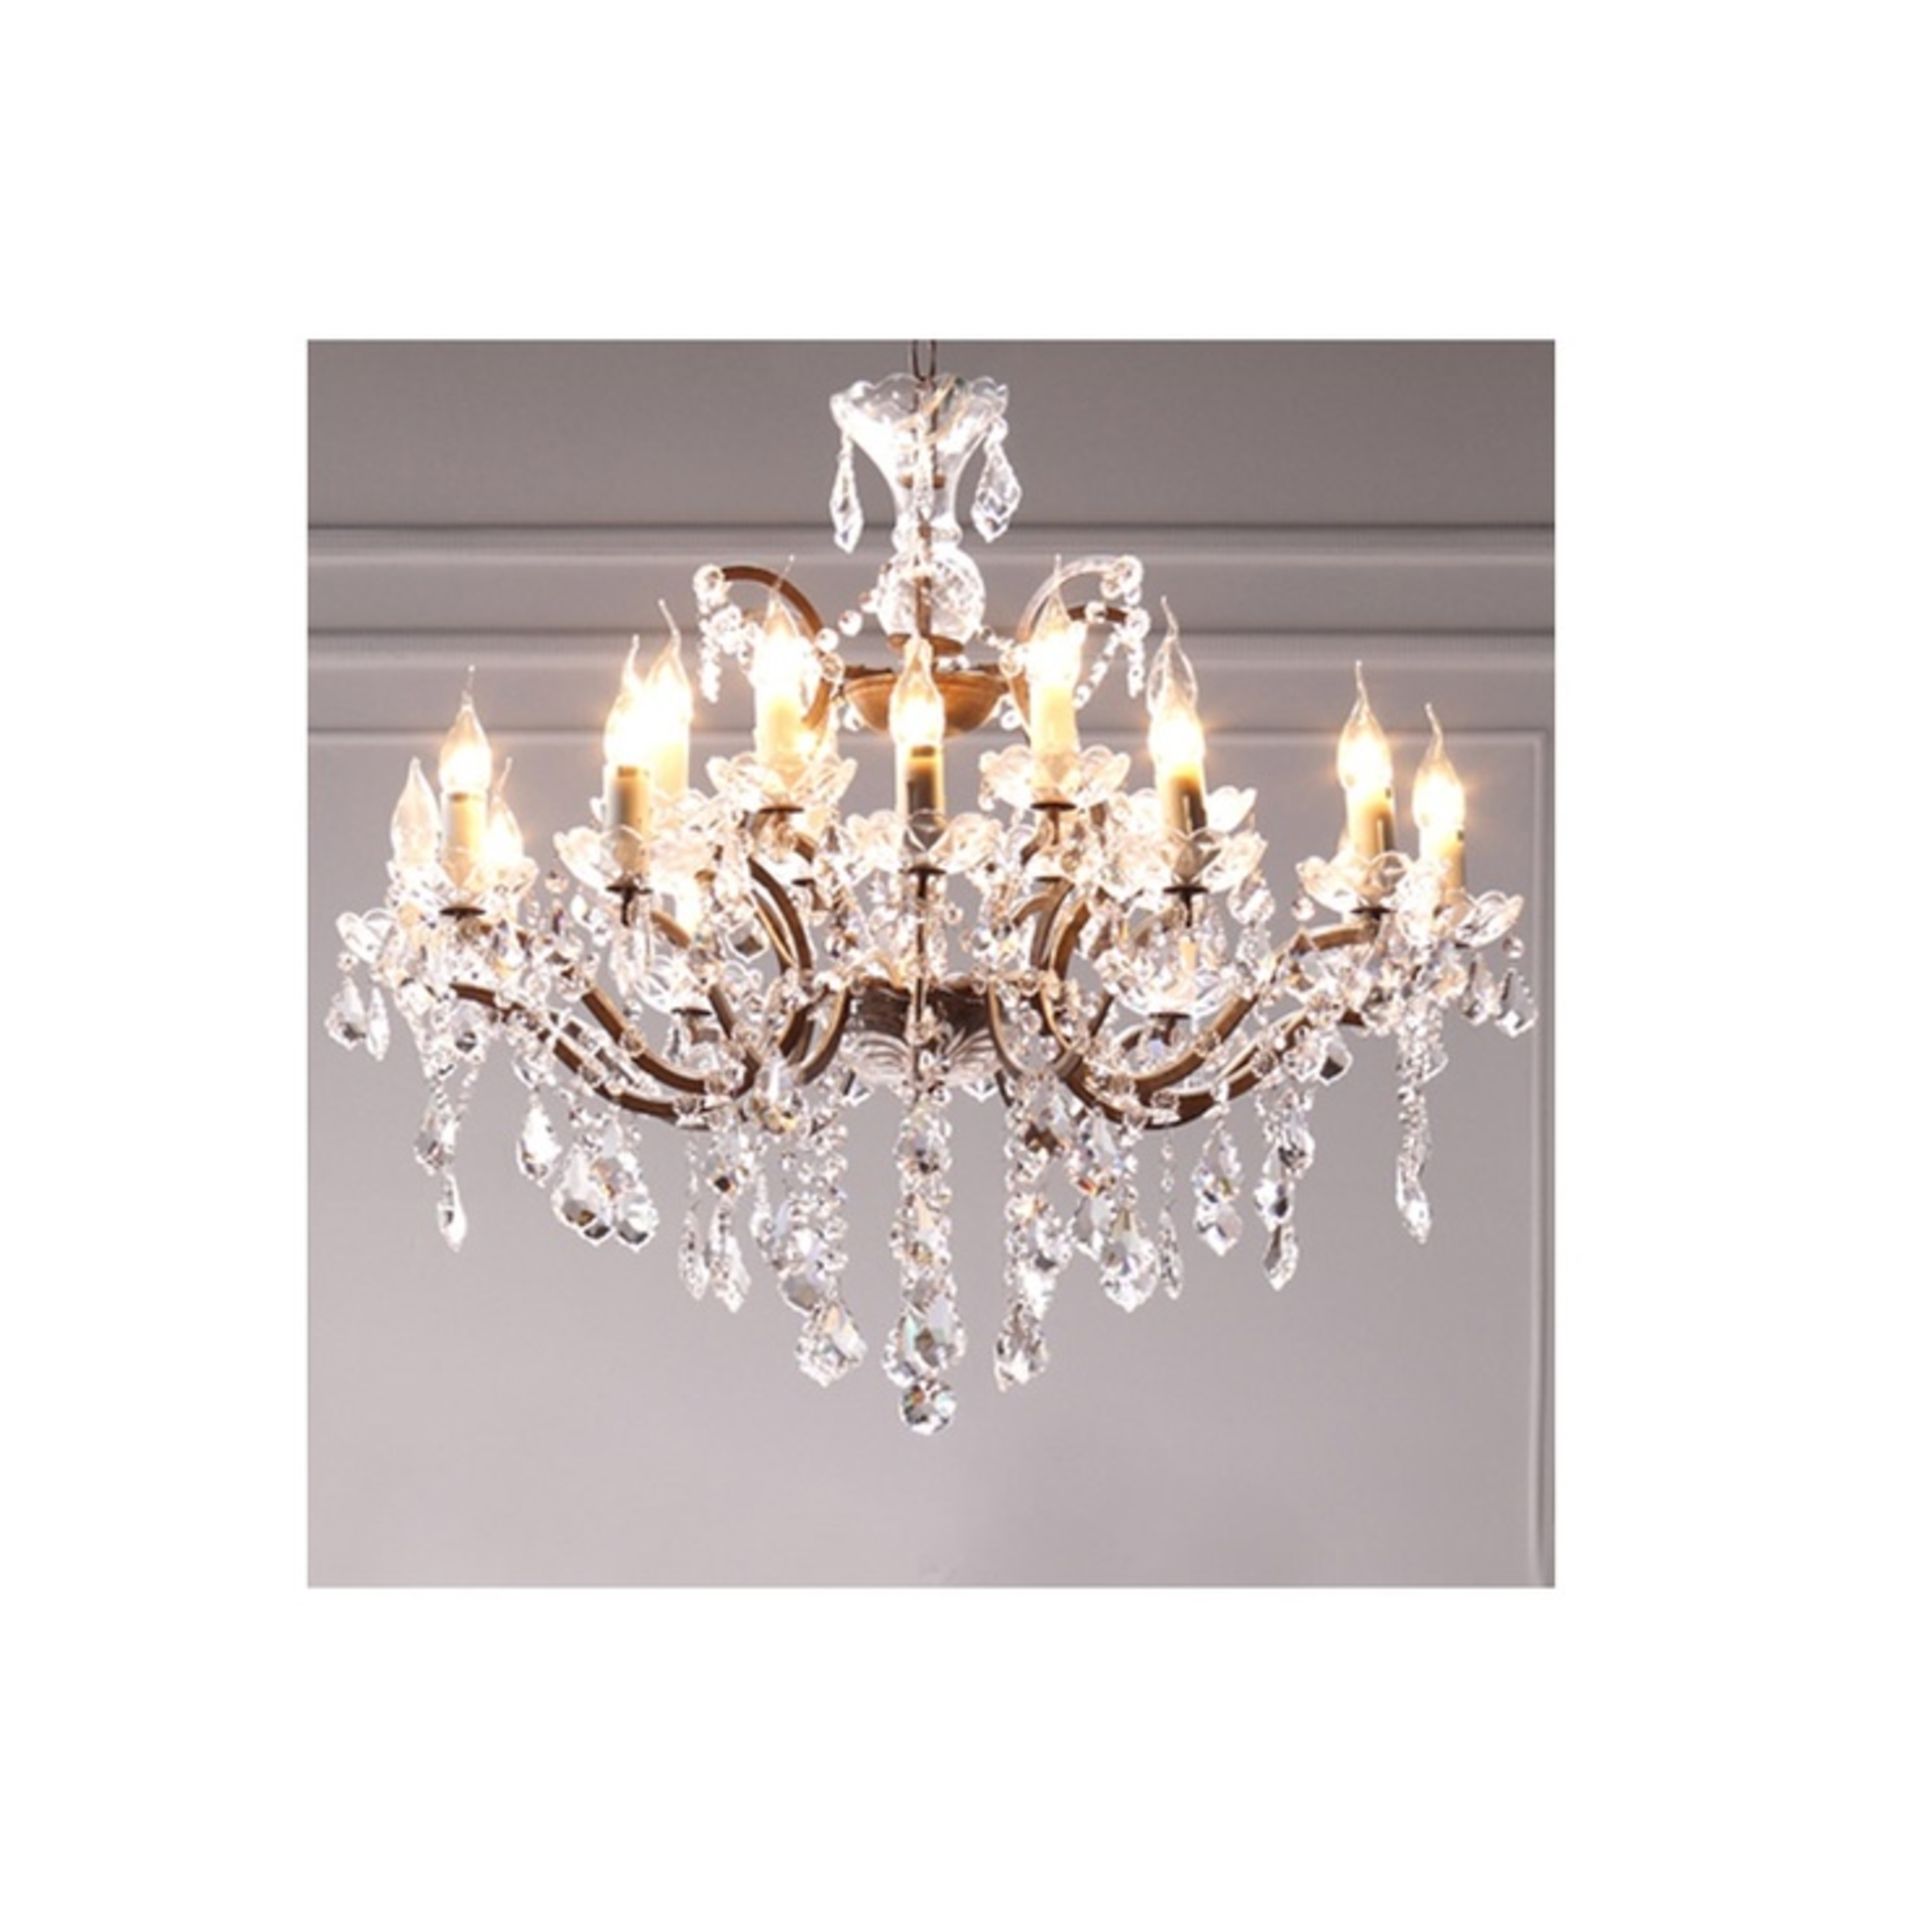 Crystal Chandelier 46cm The Crystal Chandelier collection is inspired by the elaborate designs of